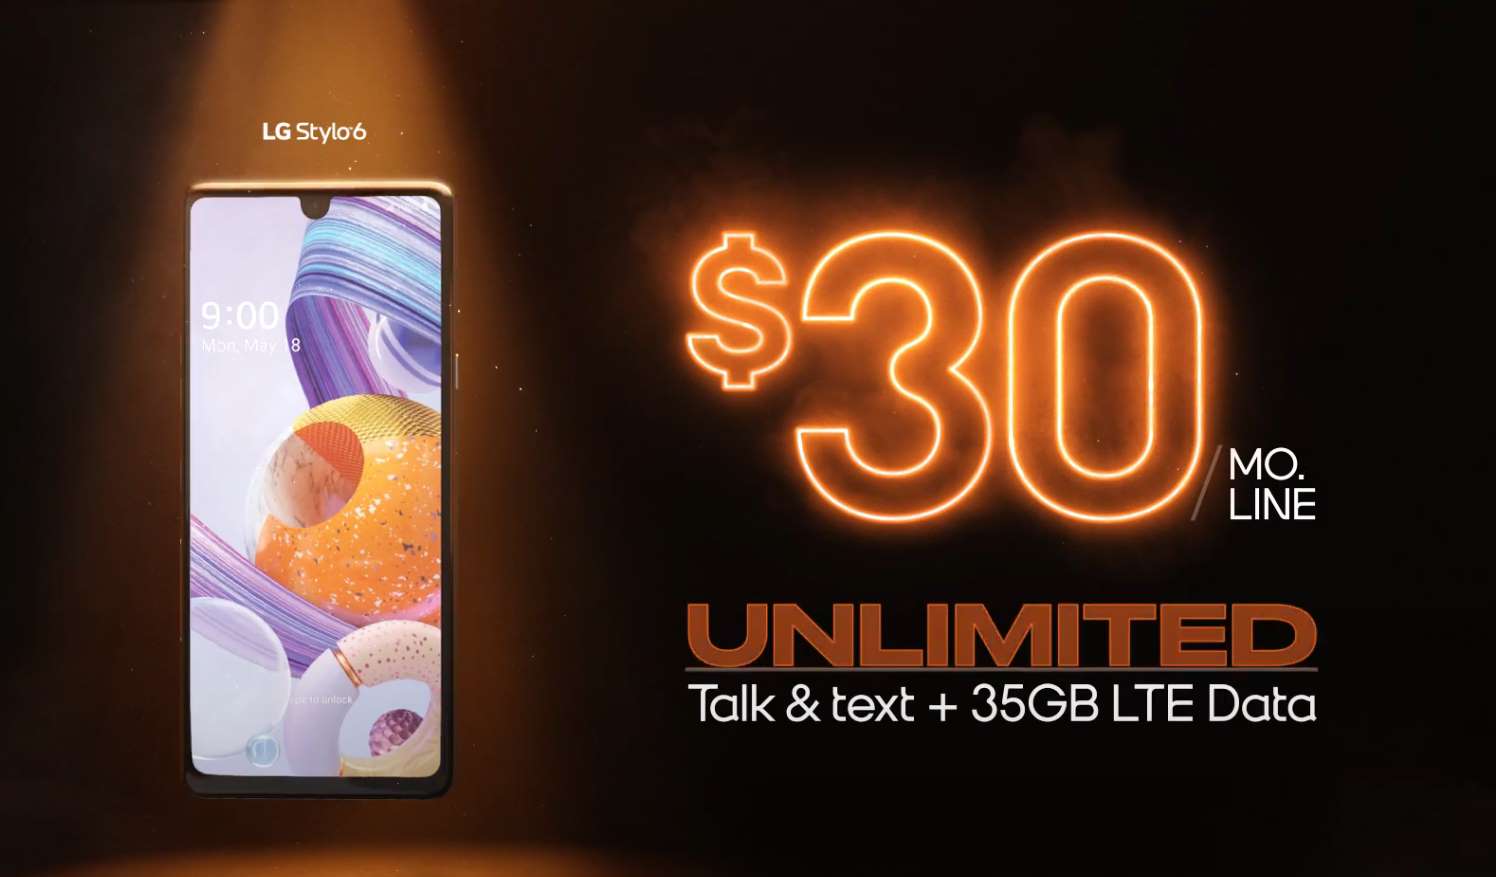 Boost Mobile (Pictured) And Others Have Launched New TV Commercials